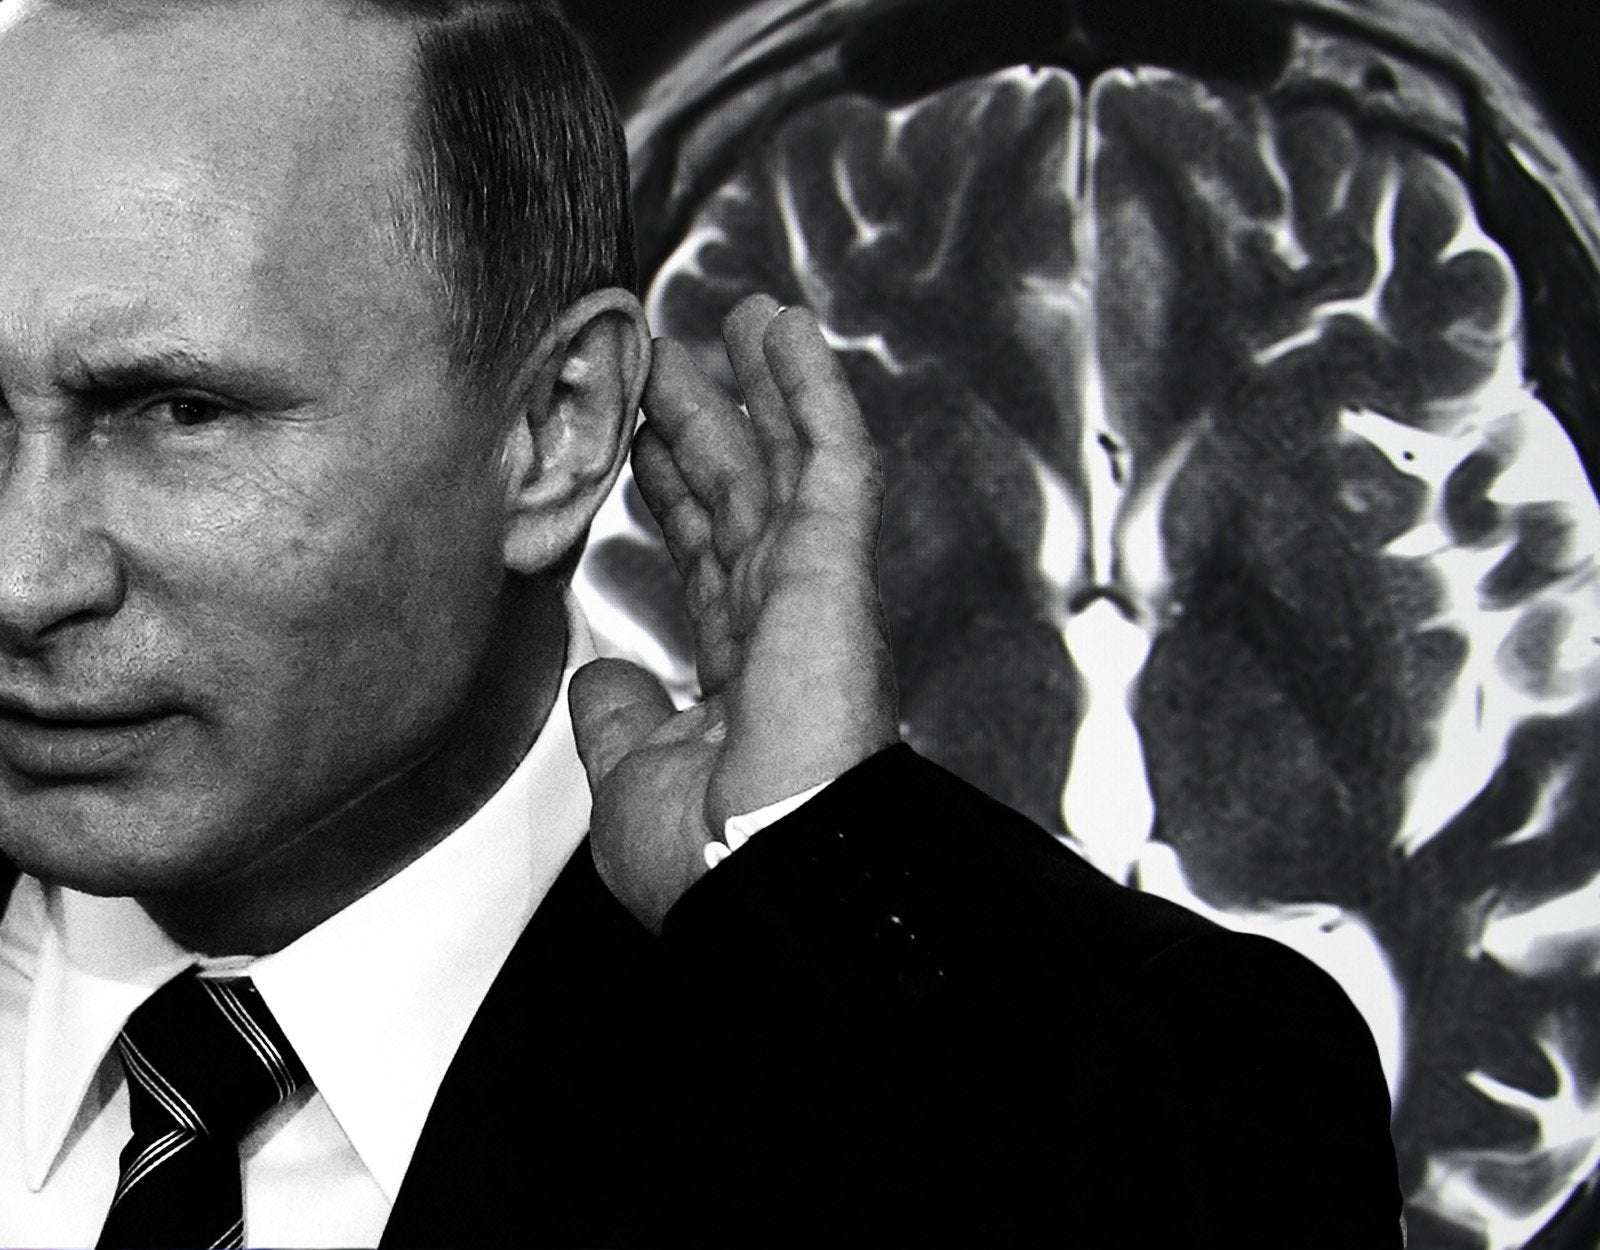 image for The Bizarre Russian Prophet Rumored to Have Putin’s Ear